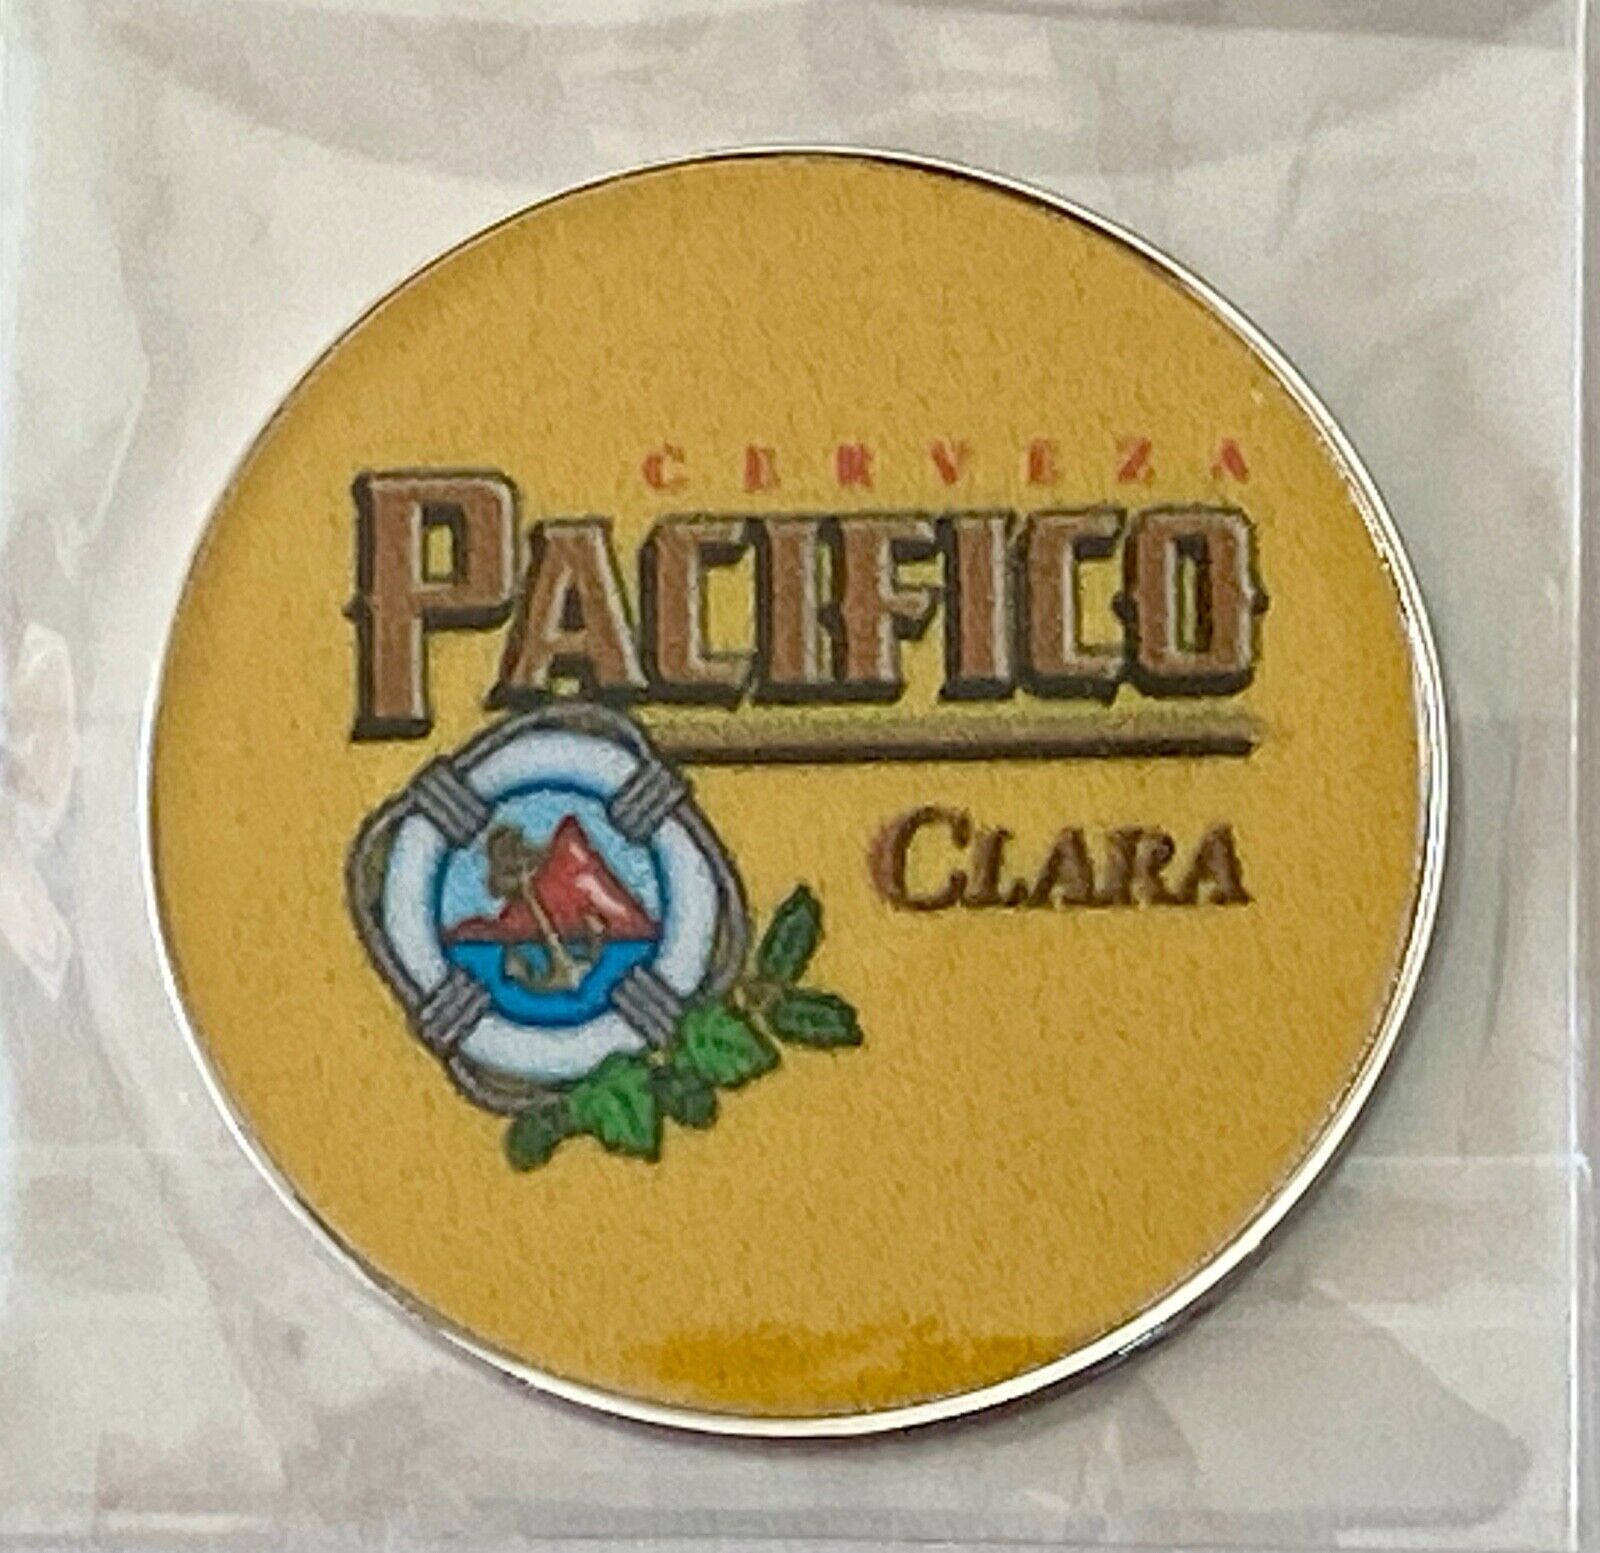 Pacifico Clara - Beer NEW Pro Marke Ball Golf Slim 32mm size Ultra-Cheap Deals Chicago Mall